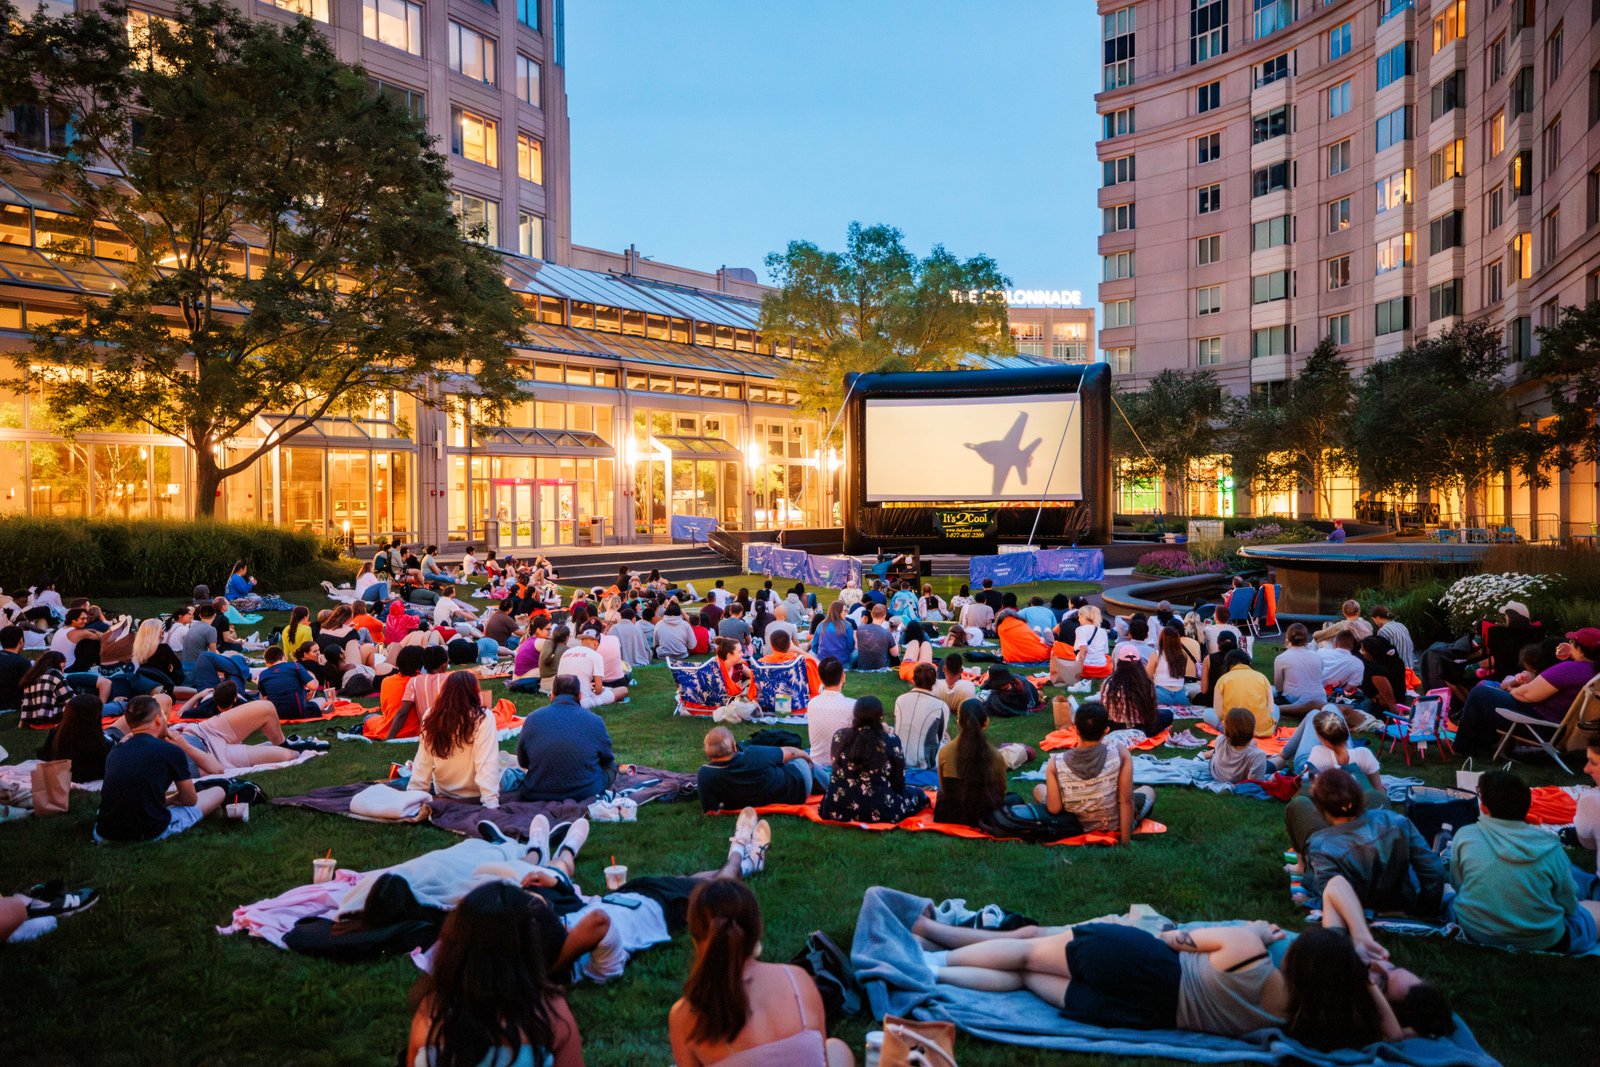 Summer Flicks at the Prudential Center - The Little Mermaid